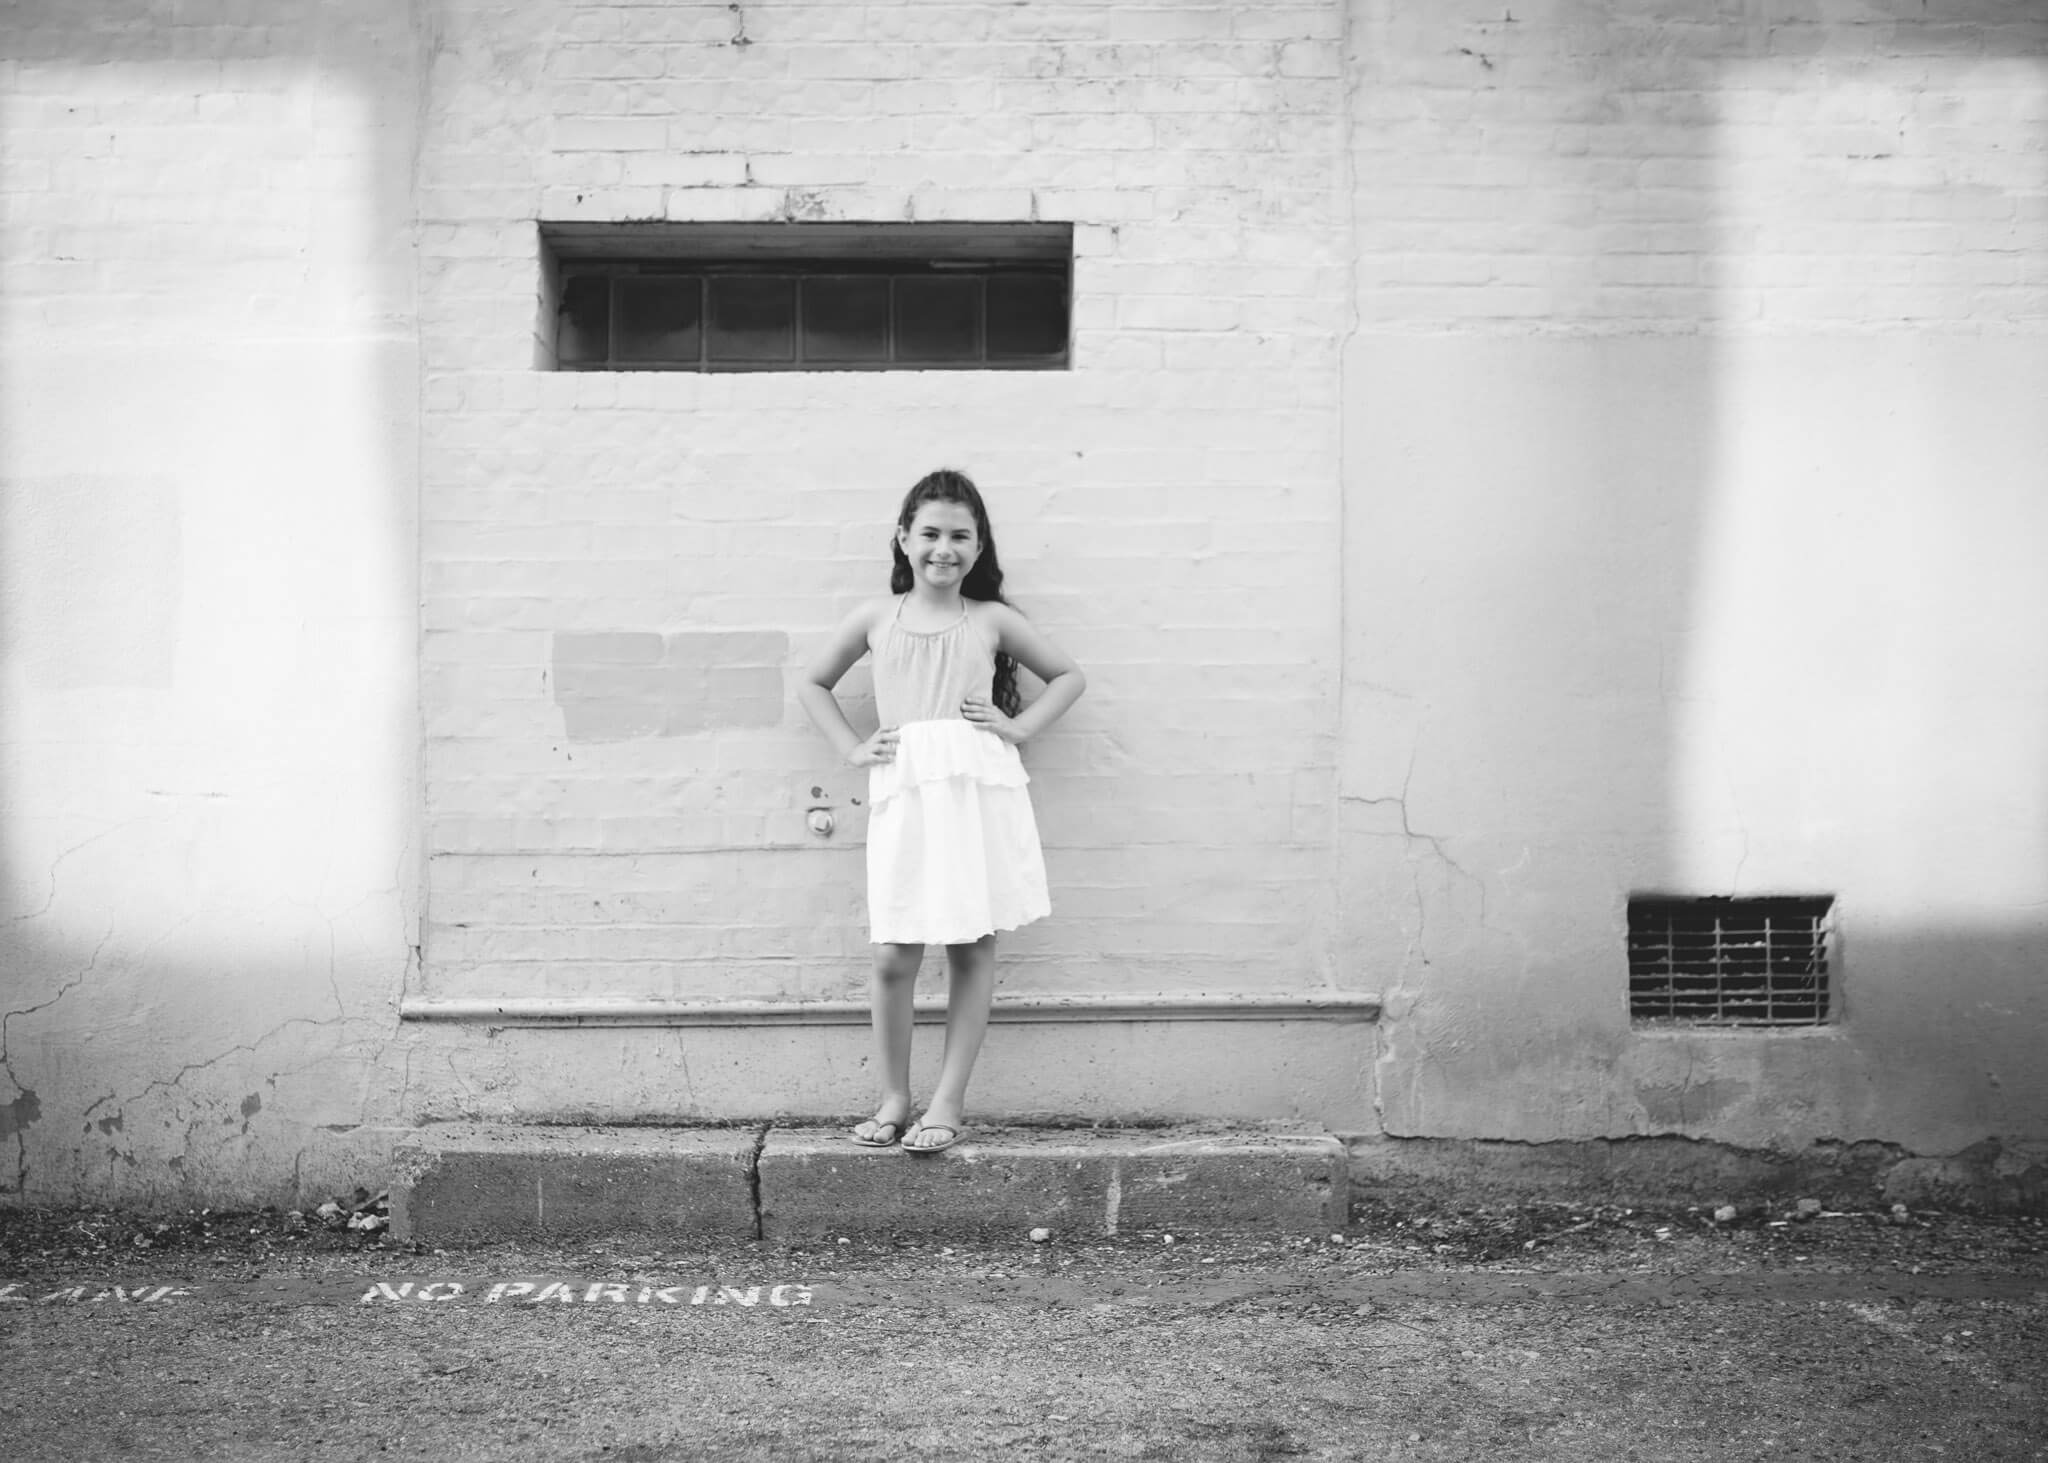 Black and white downtown photo of girl on step